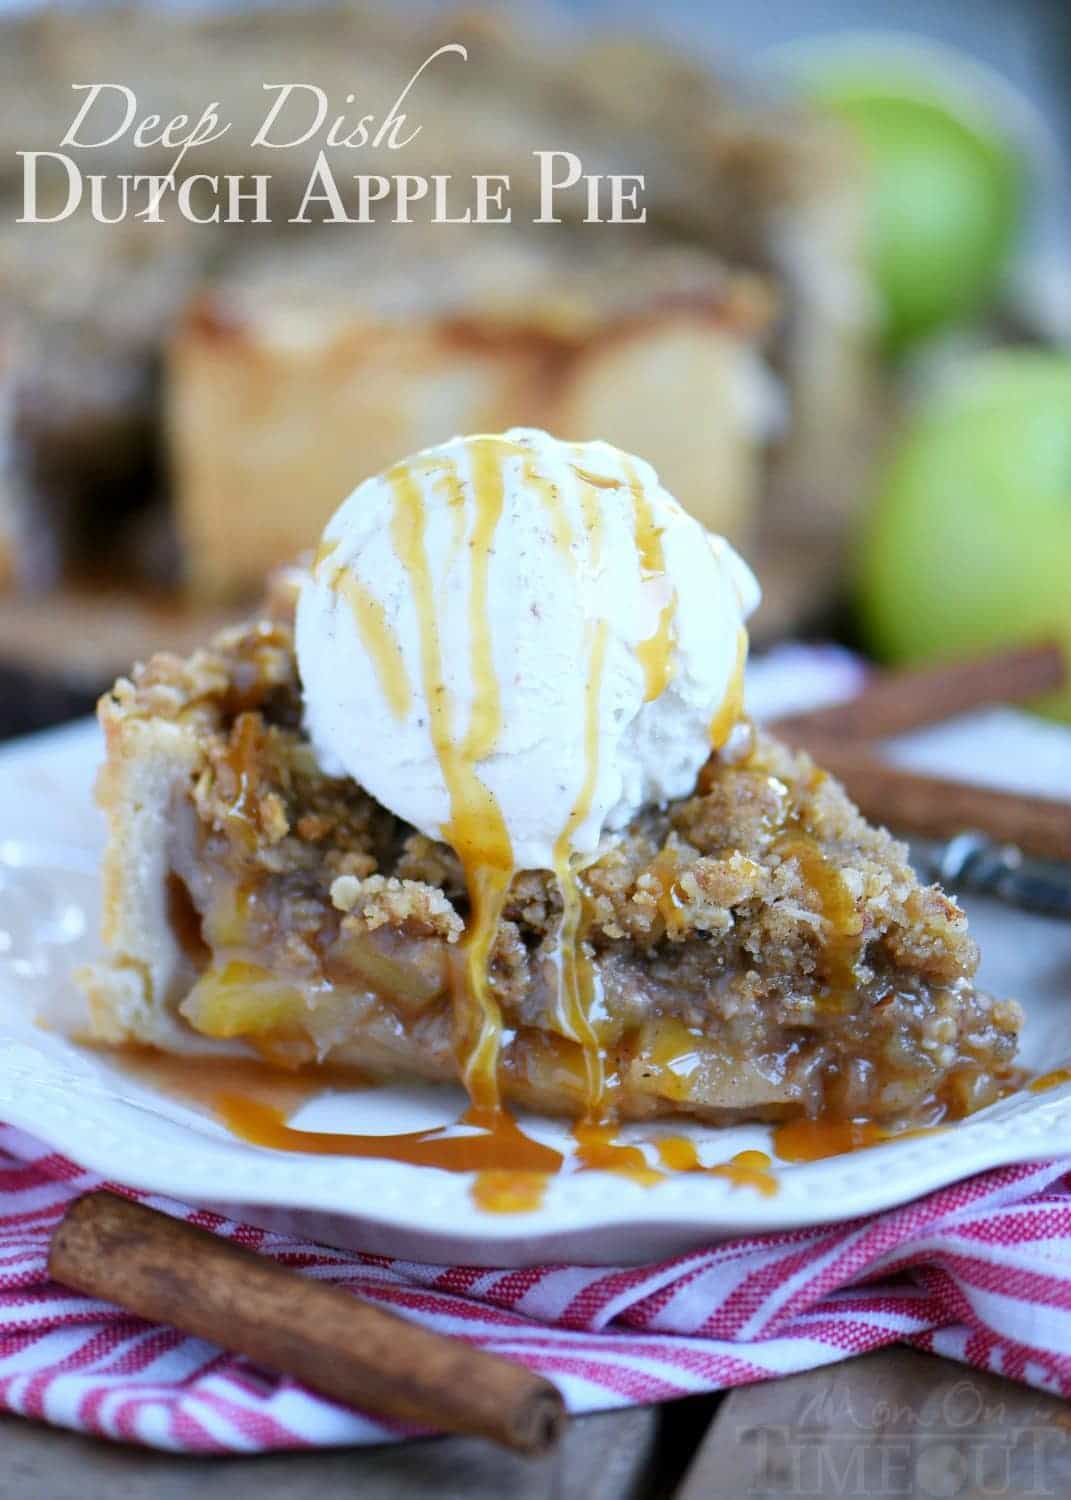 Deep Dish Dutch Apple Pie is loaded with a spiced apple filling and topped with a crunchy, sweet, pecan streusel topping. Best served with a big scoop of vanilla ice cream and caramel sauce. This is THE dessert for the fall season! | Mom On Timeout